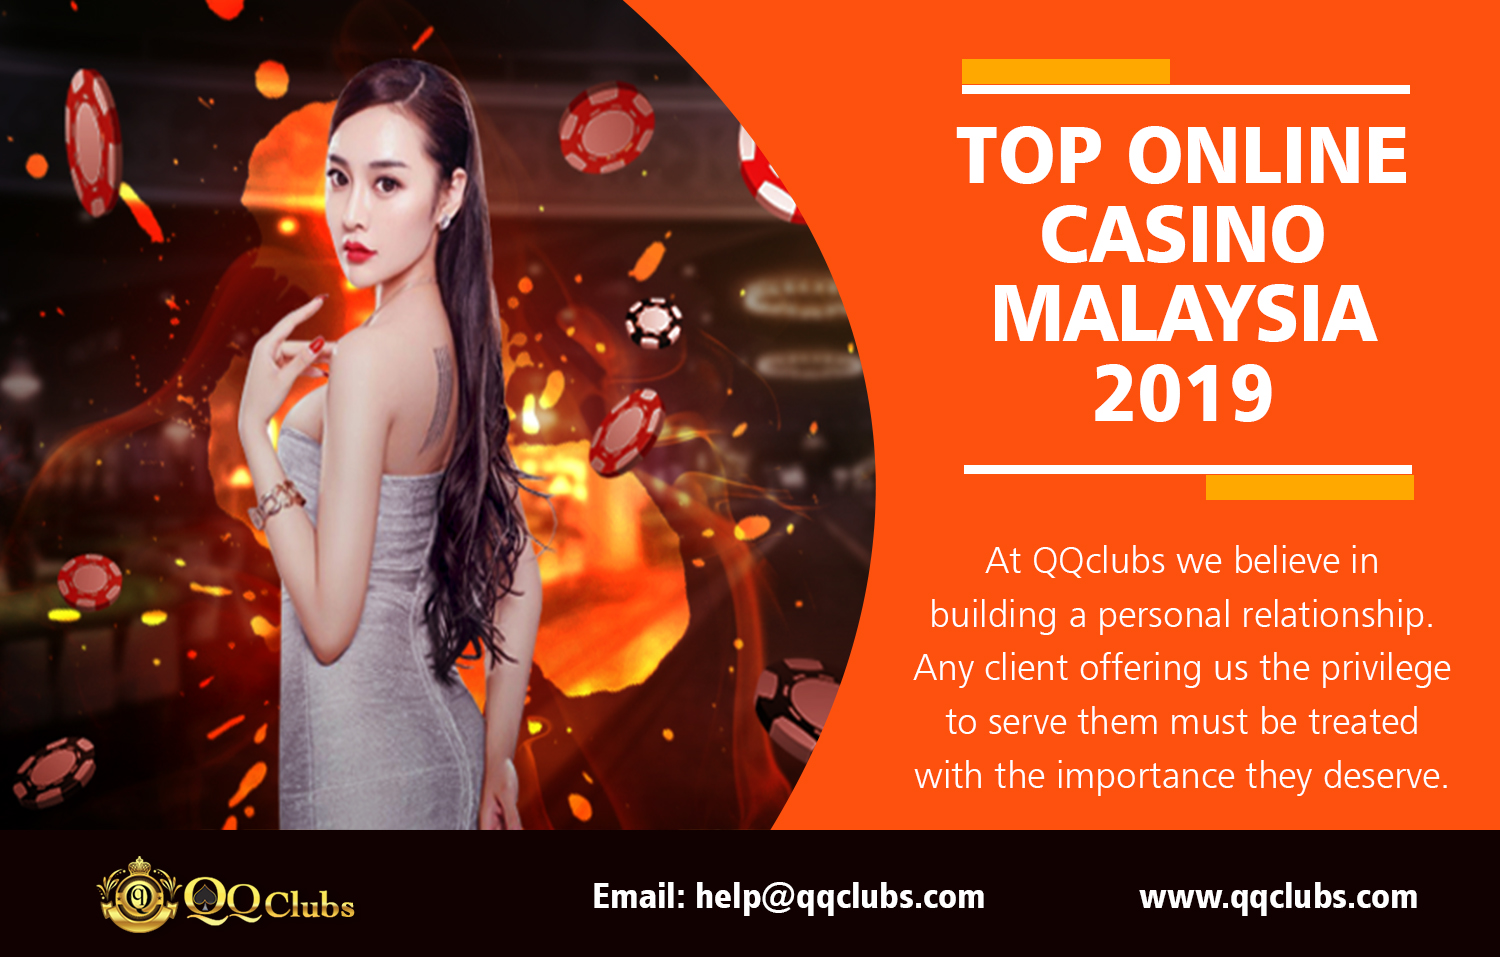 trusted online casino malaysia 2019 topic